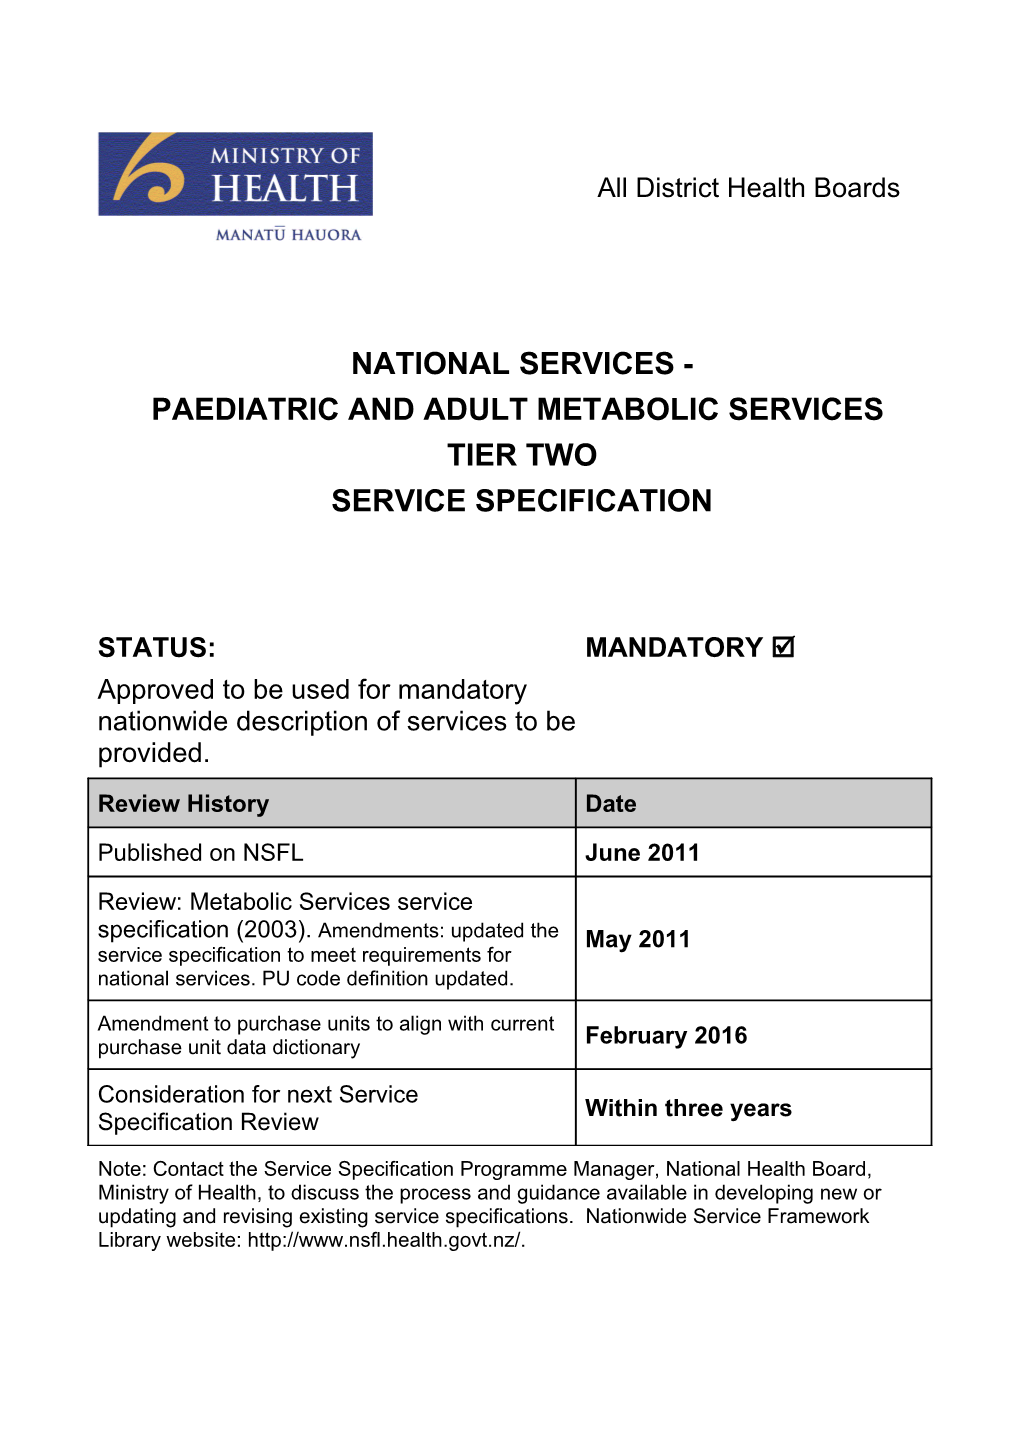 Paediatric and Adult Metabolic Services